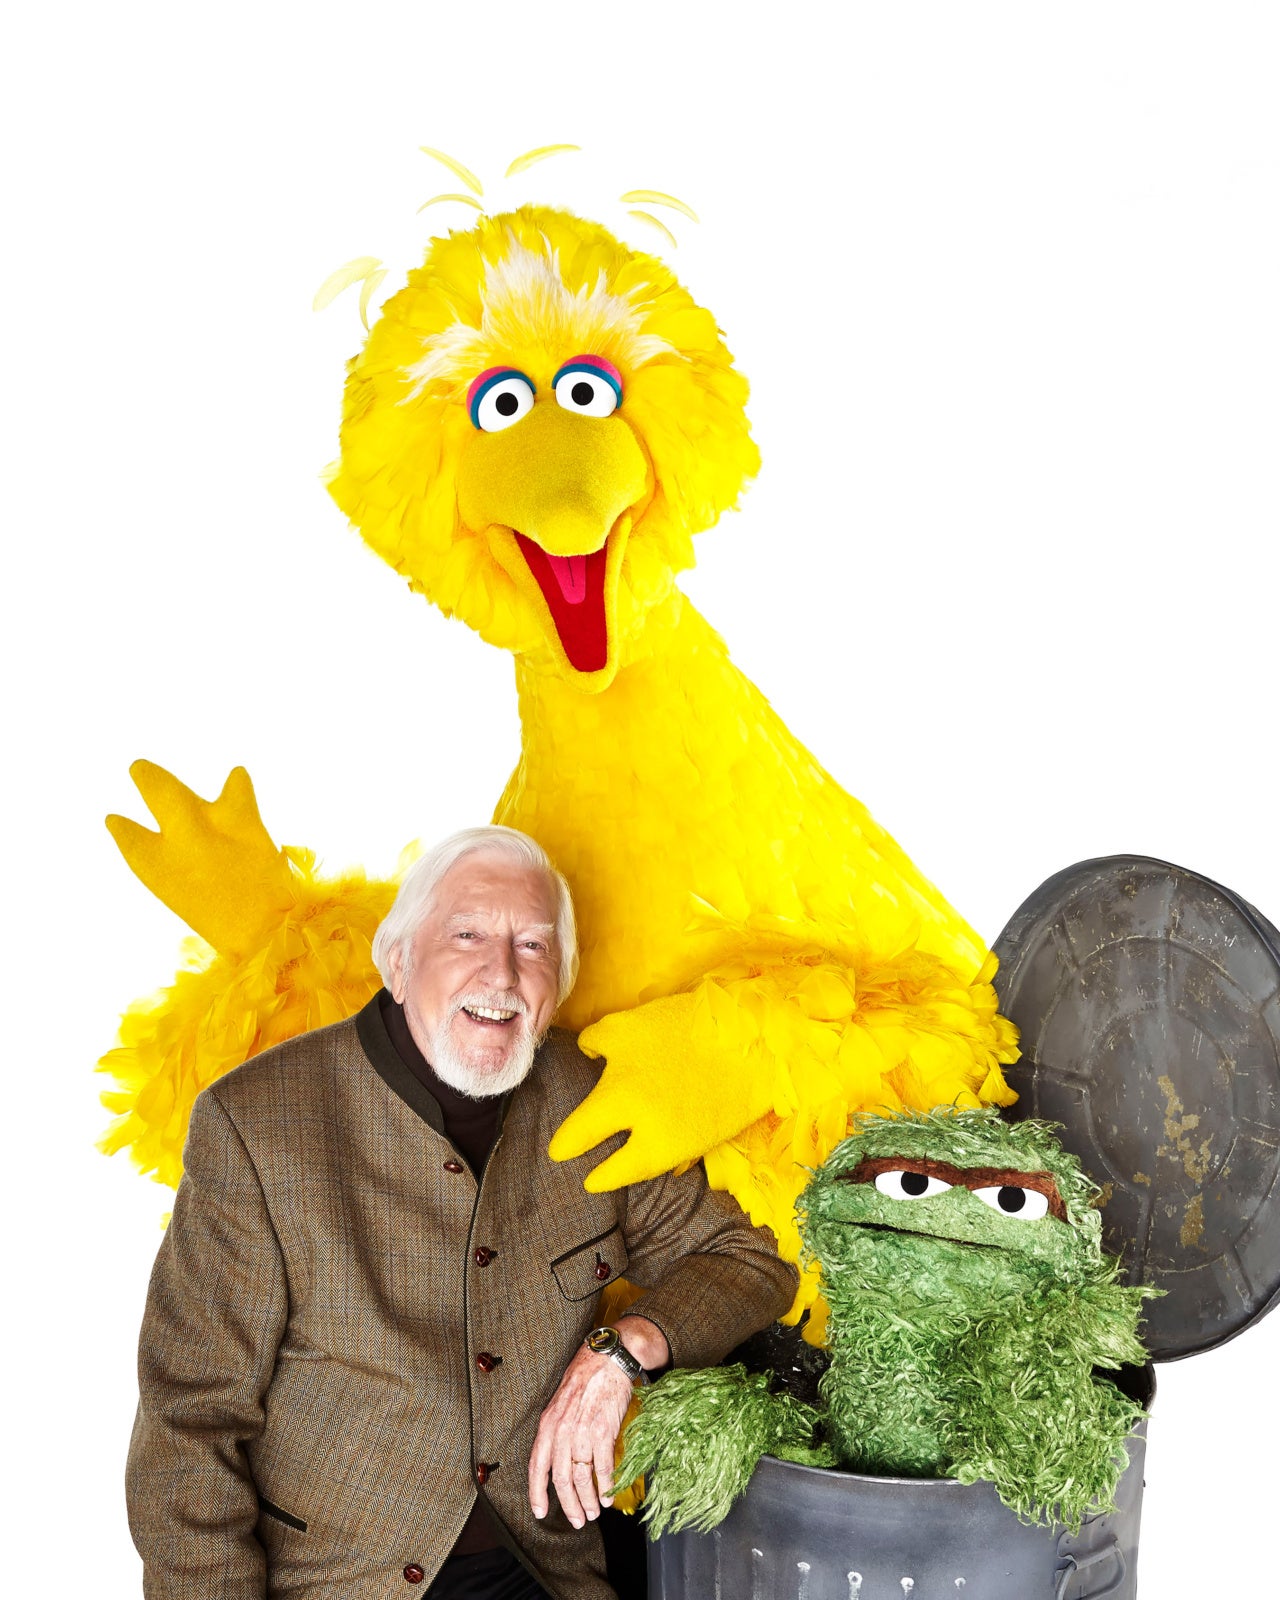 Former Lovable Big Bird And Oscar Puppeteer Passed Away After 49 Years Of Service - WORLD OF BUZZ